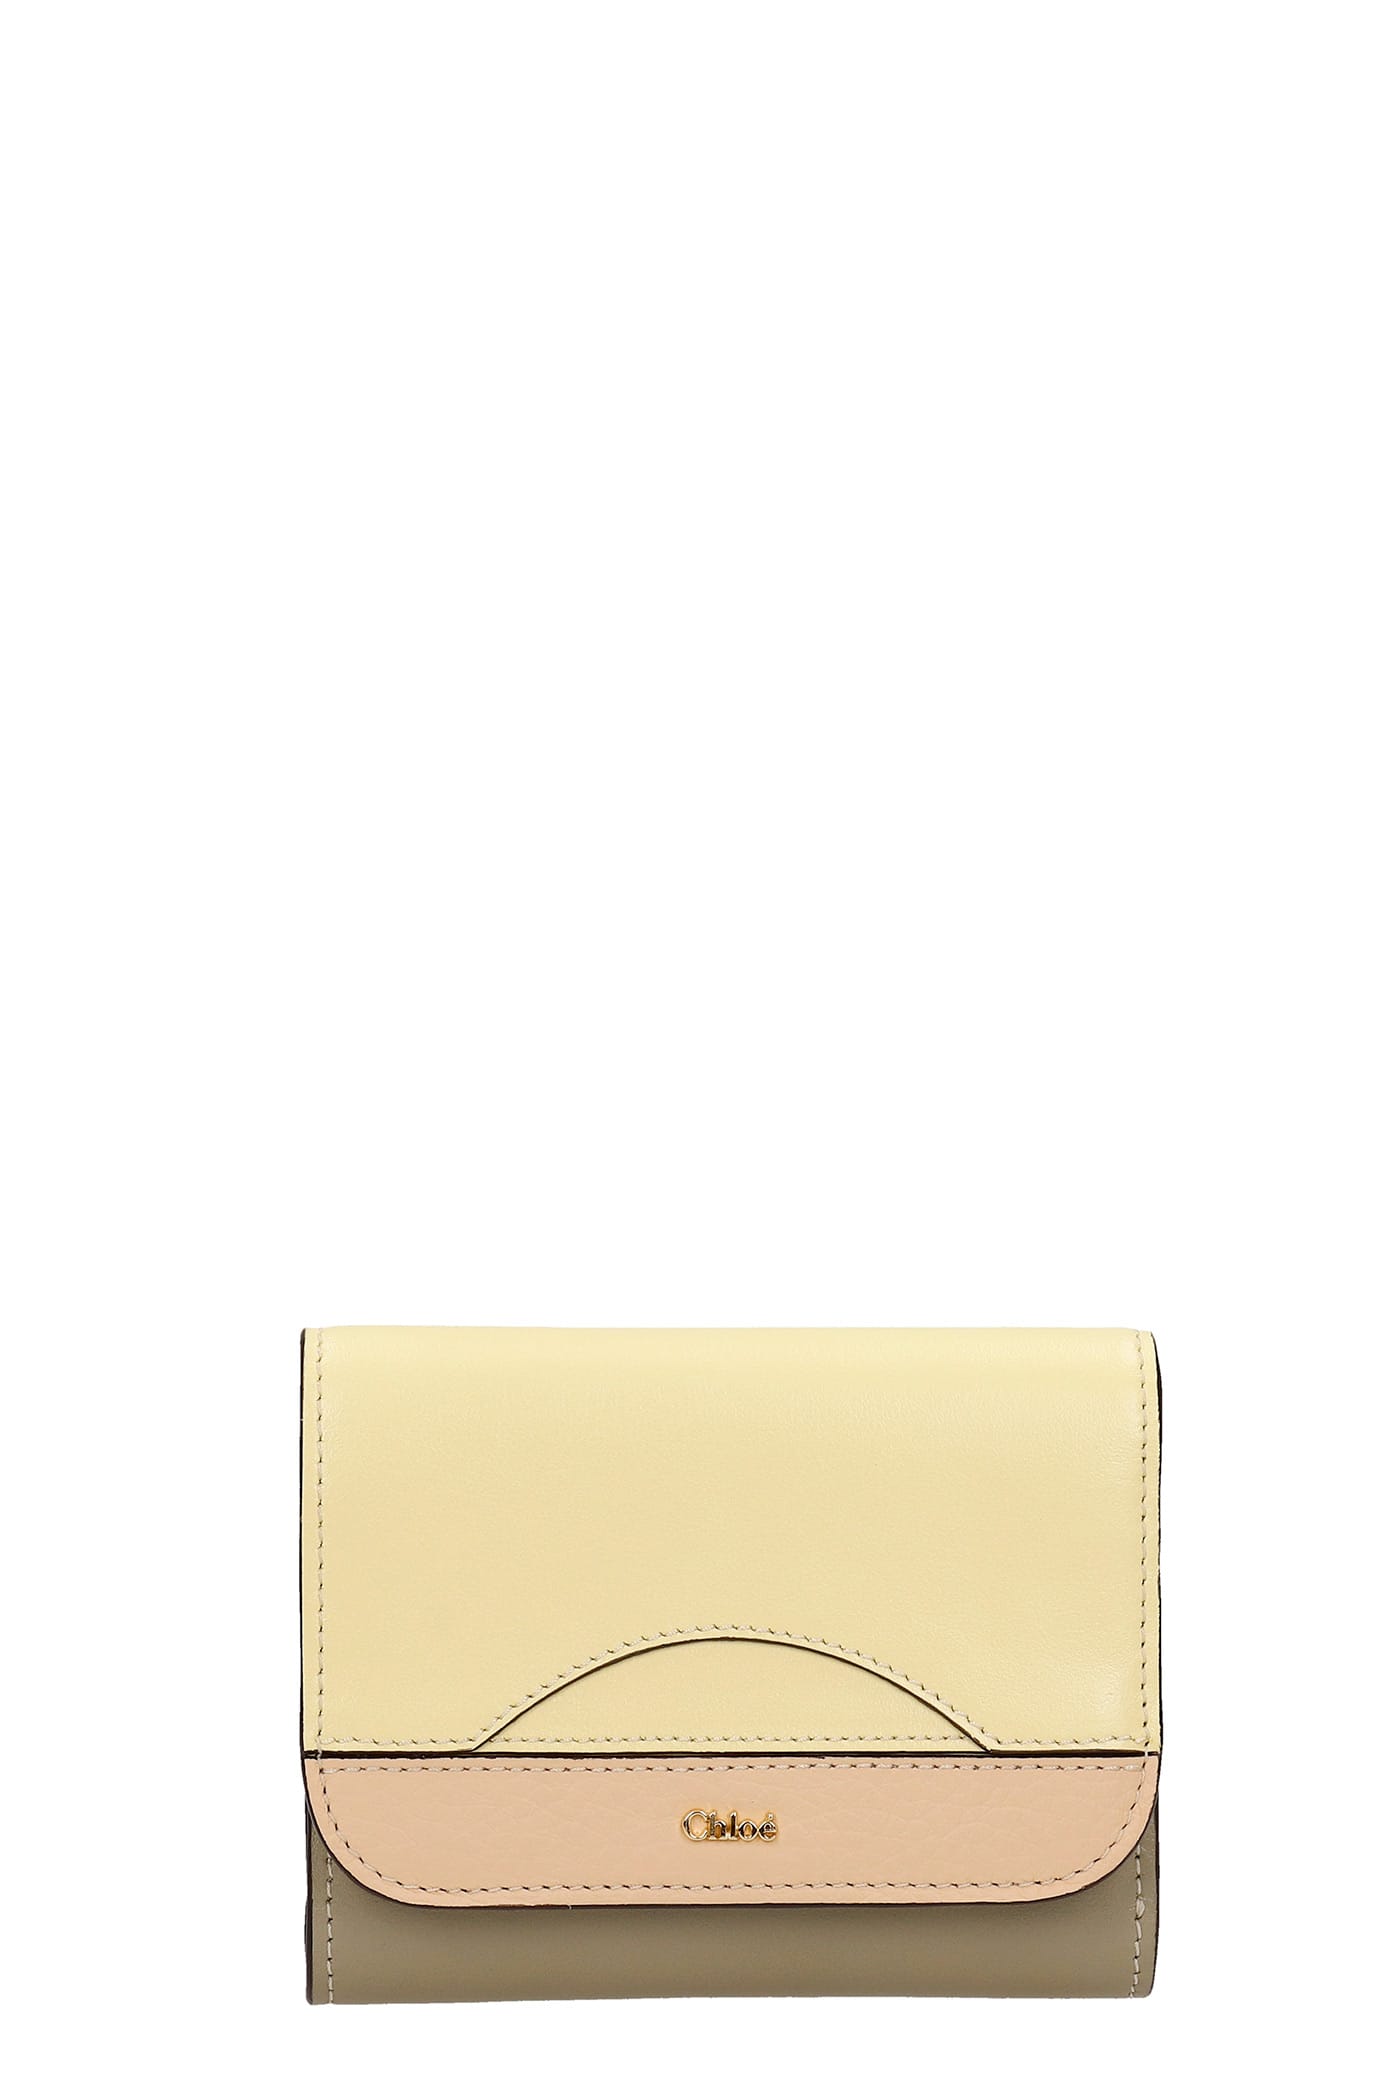 Chloé Wallet In Yellow Leather